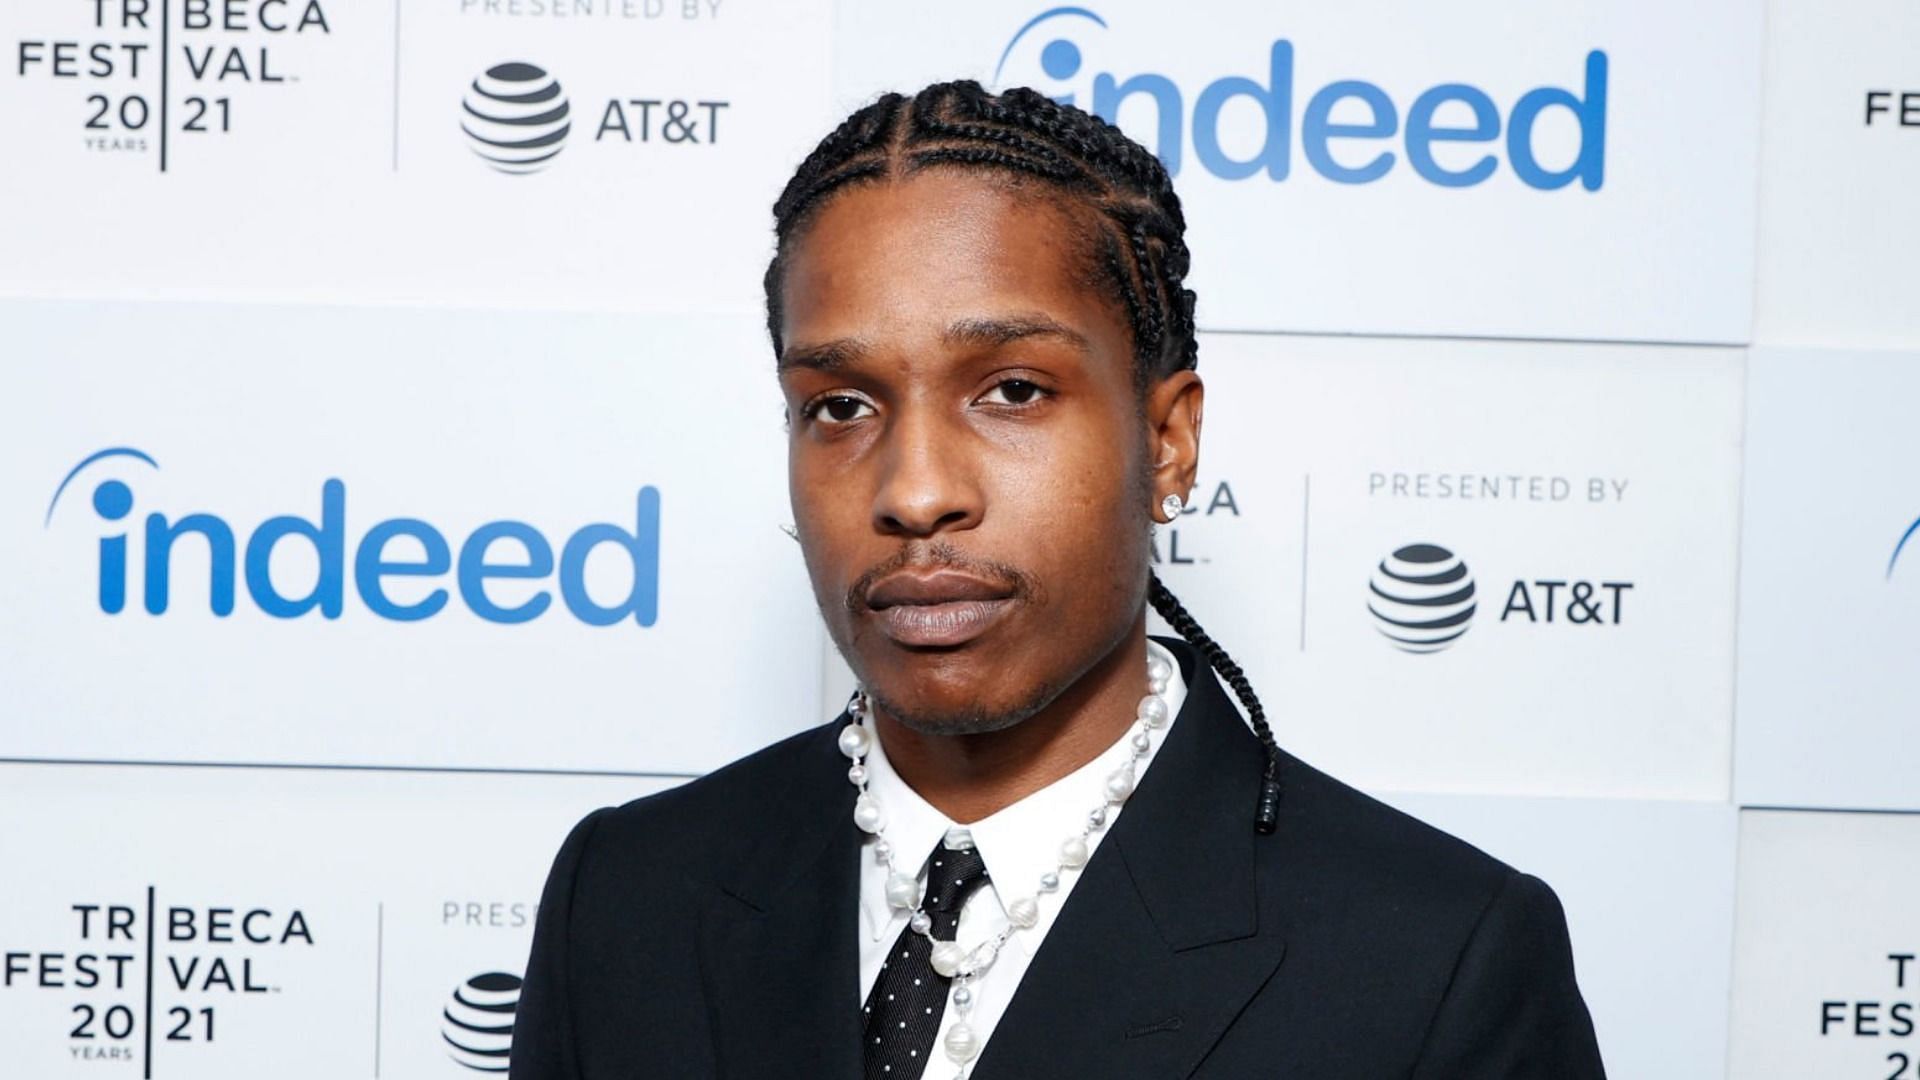 ASAP Rocky was reportedly arrested at LAX airport (Image via Arturo Holmes/Getty Images)